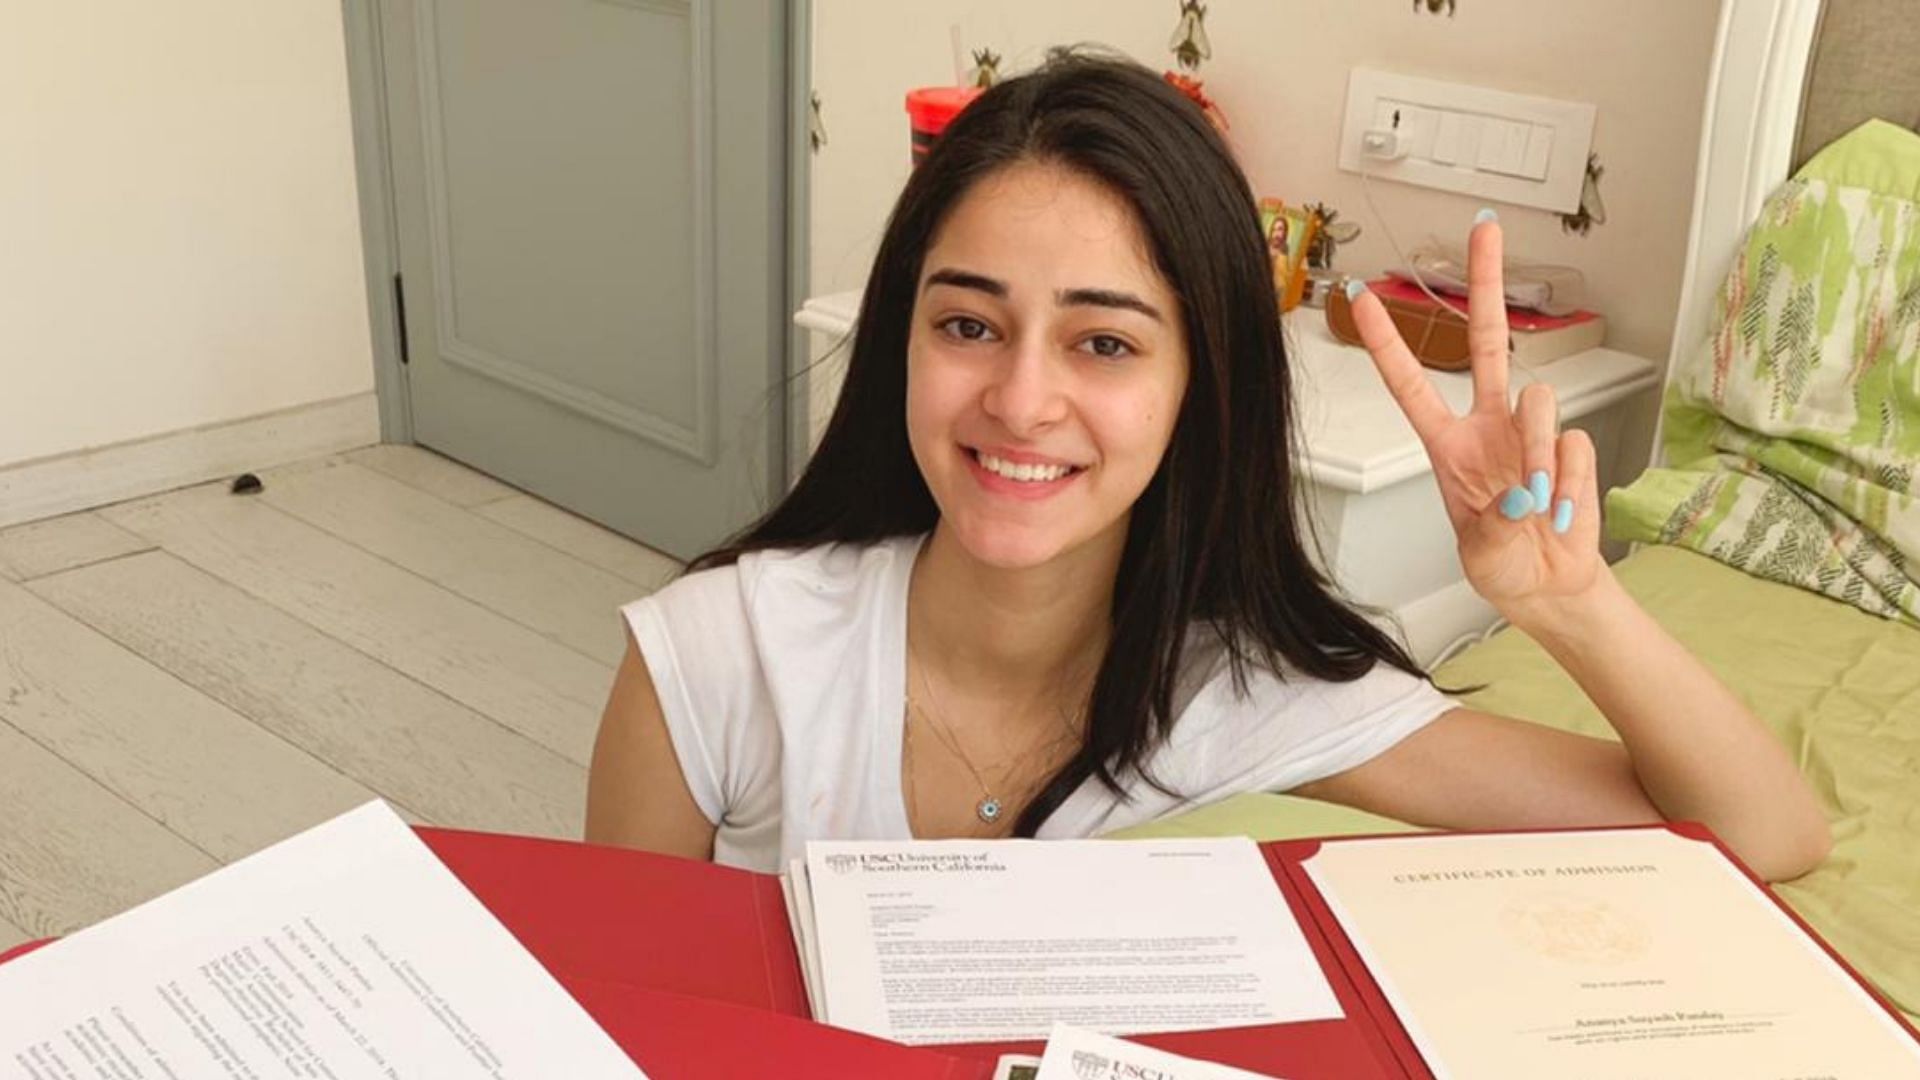 Ananya Panday has denied rumours that she faked her admission to USC.